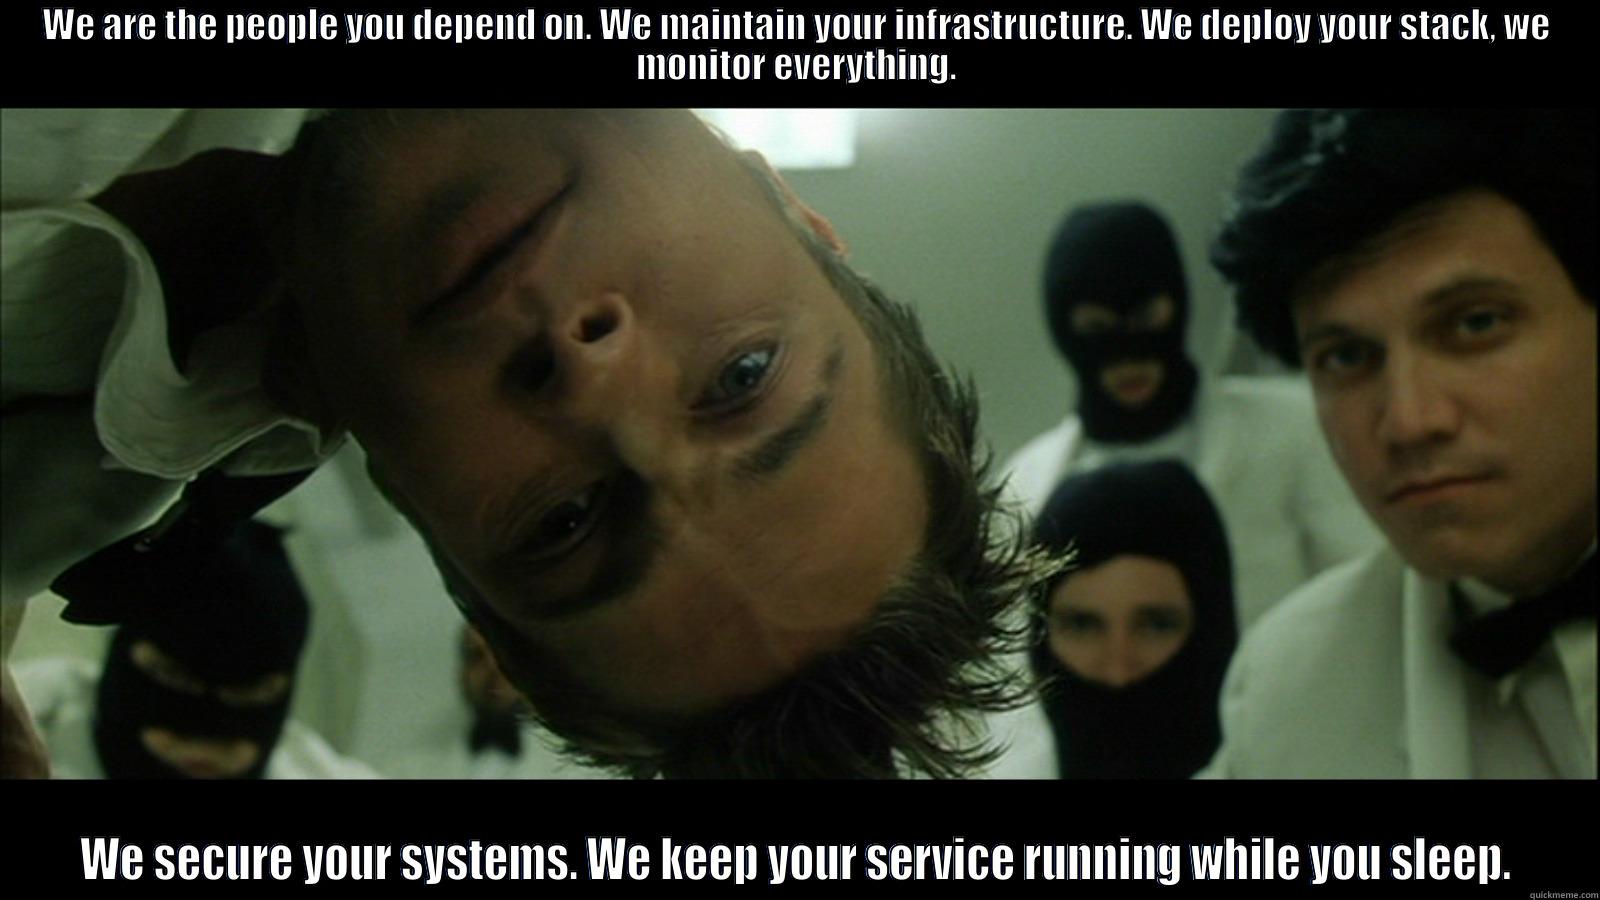 SysAdmin Appreciation Day - WE ARE THE PEOPLE YOU DEPEND ON. WE MAINTAIN YOUR INFRASTRUCTURE. WE DEPLOY YOUR STACK, WE MONITOR EVERYTHING. WE SECURE YOUR SYSTEMS. WE KEEP YOUR SERVICE RUNNING WHILE YOU SLEEP. Misc